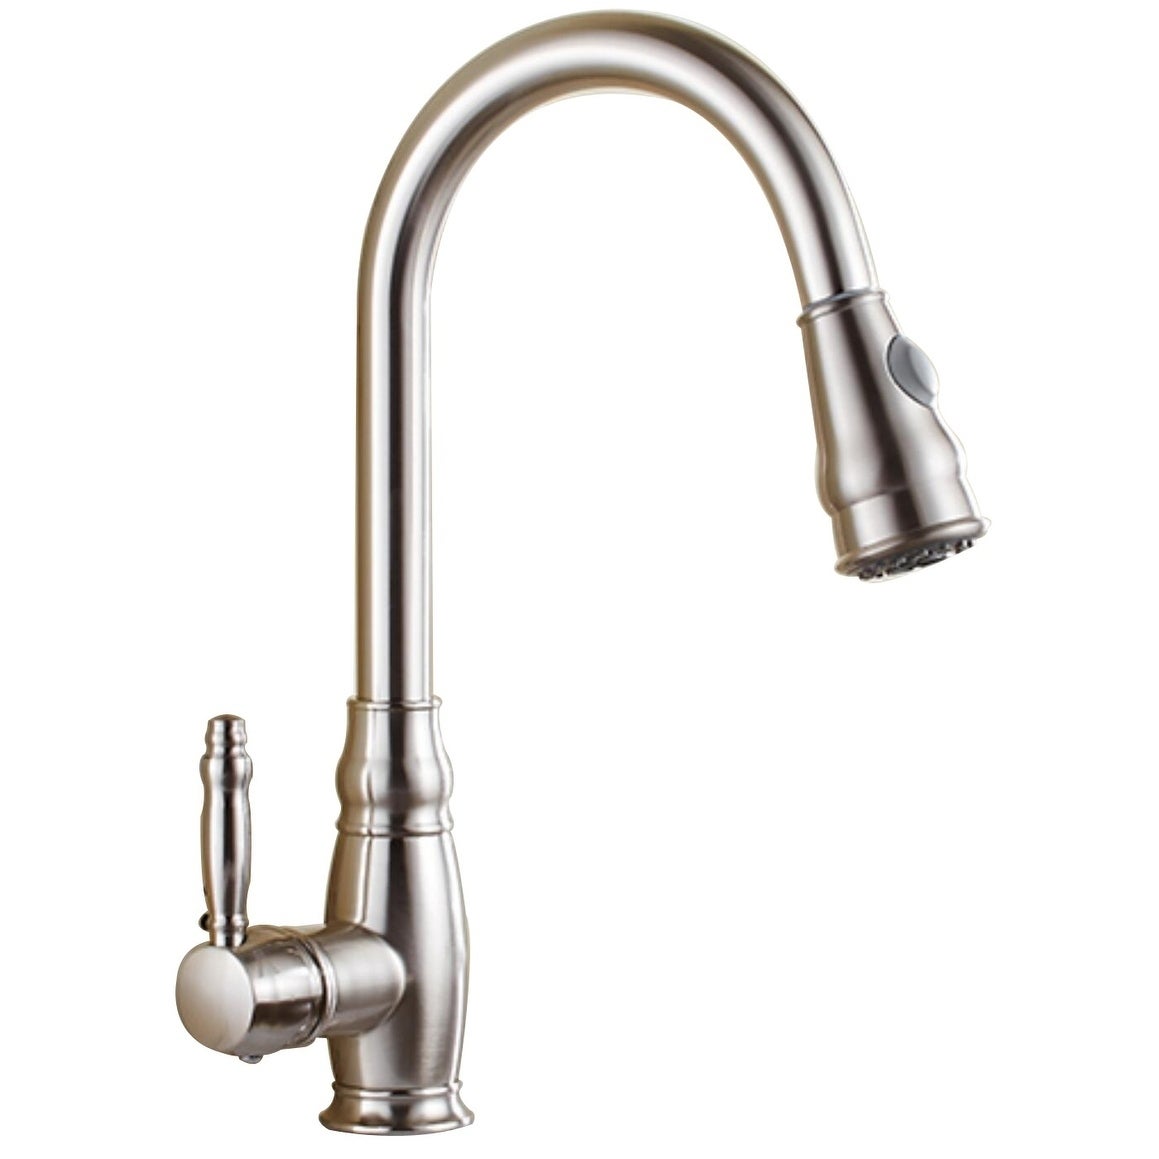 F80032 Bn Pull Out Kitchen Faucet, Brushed Nickel - 17.3 X 7.7 X 2.1 In.